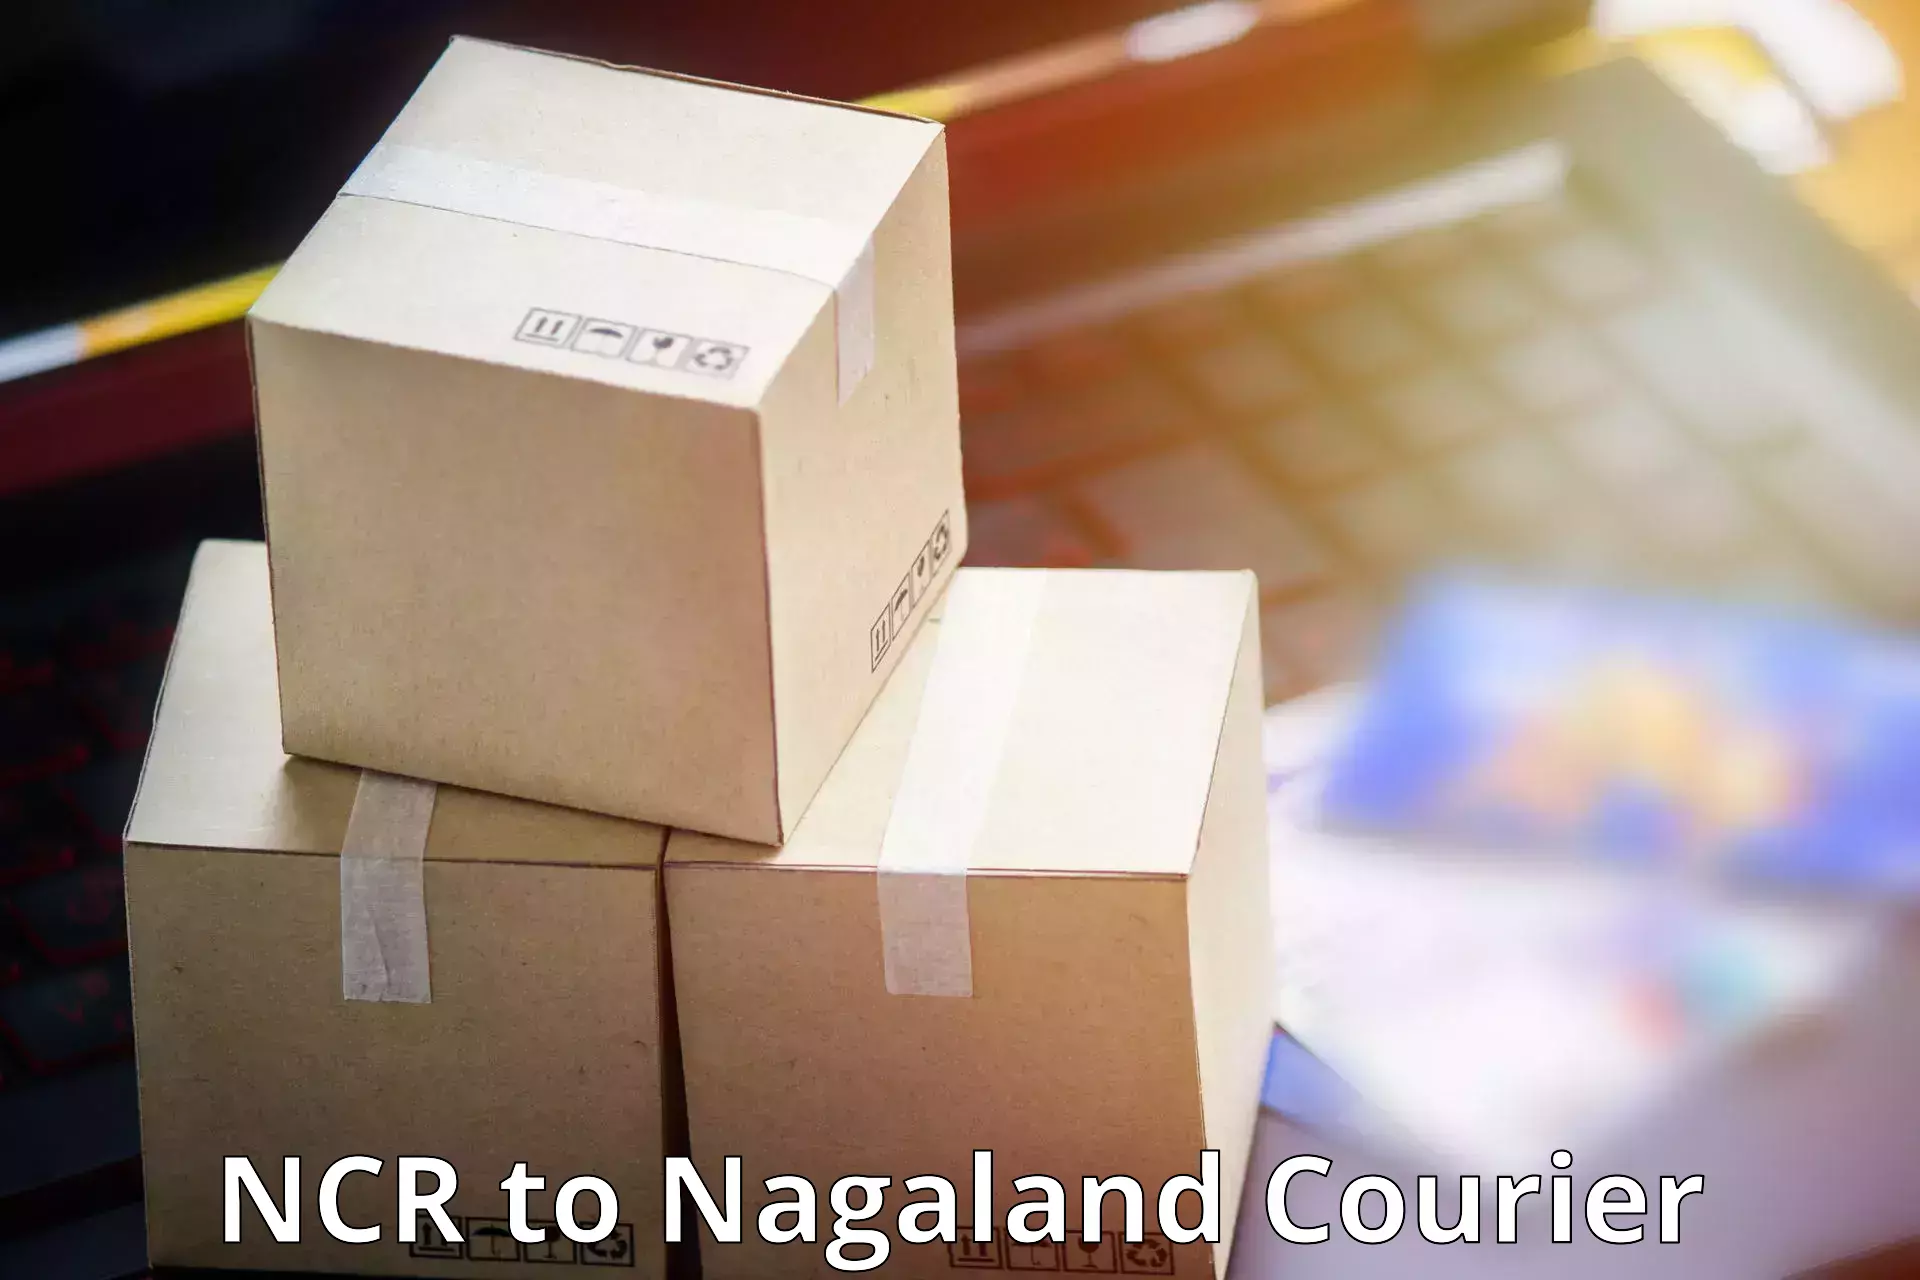 Courier insurance NCR to Phek